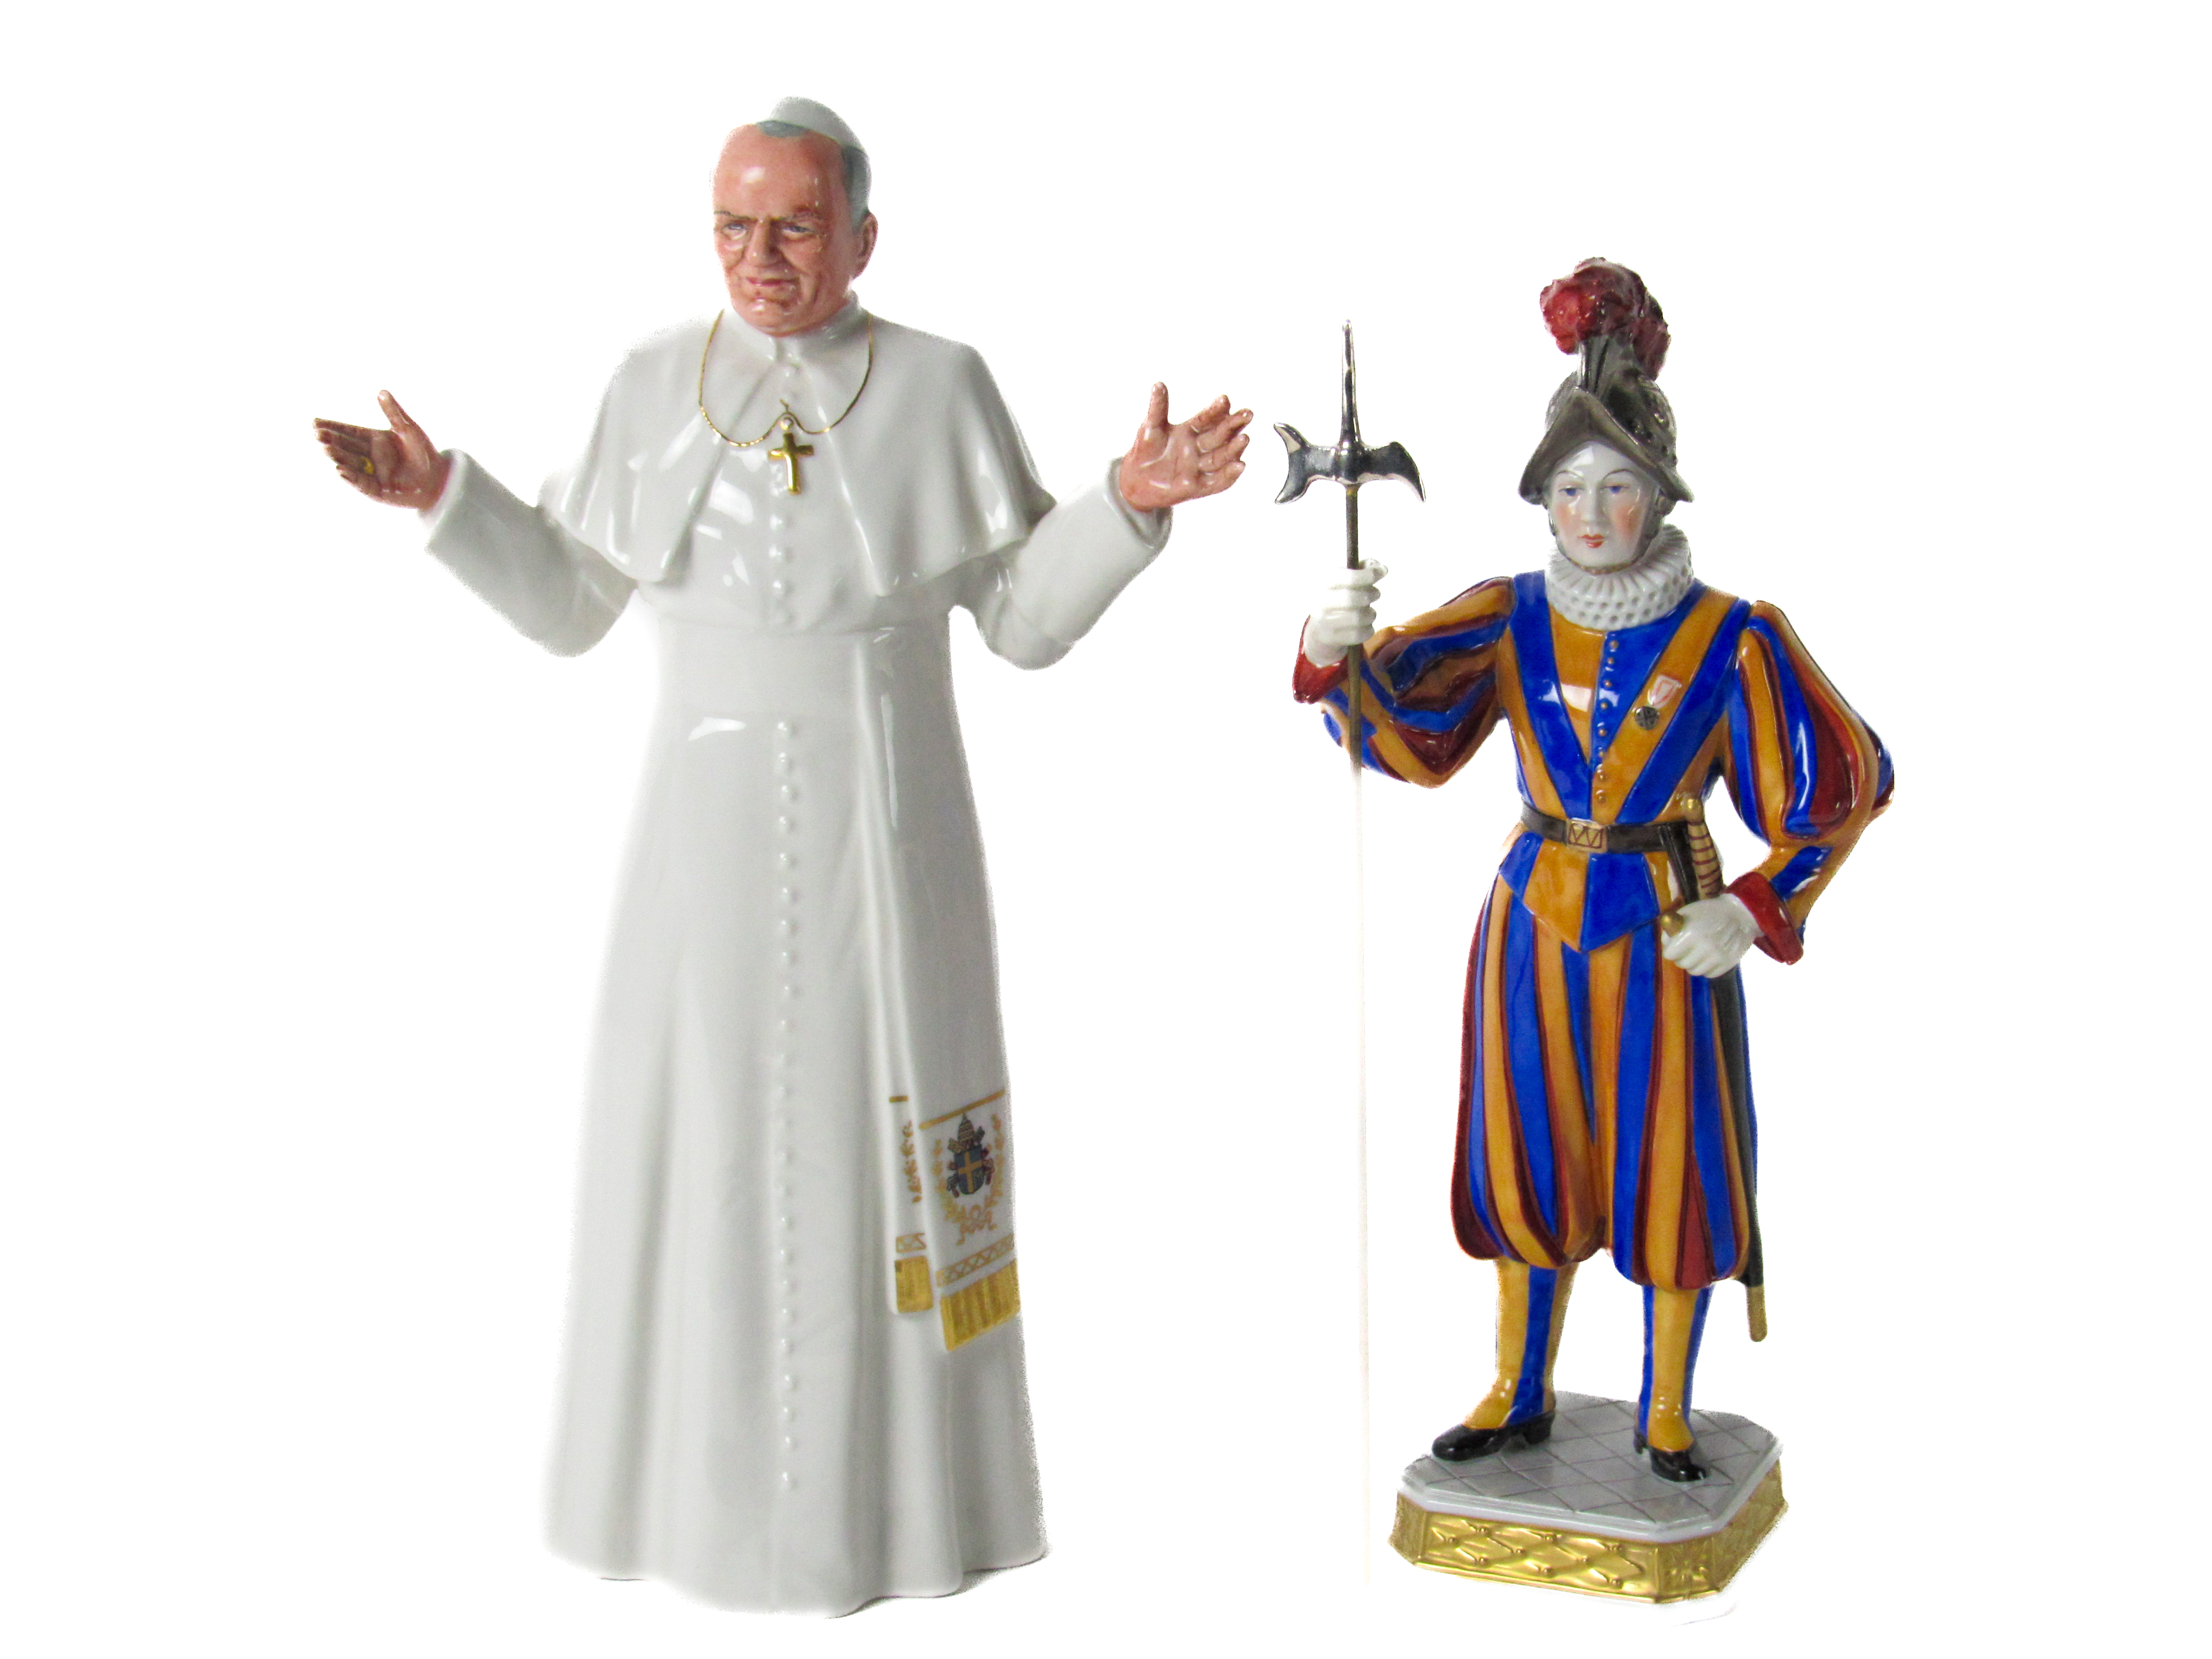 A Royal Doulton Figure, "His Holiness Pope John Paul II (H.N. 2888), designed by Eric J.